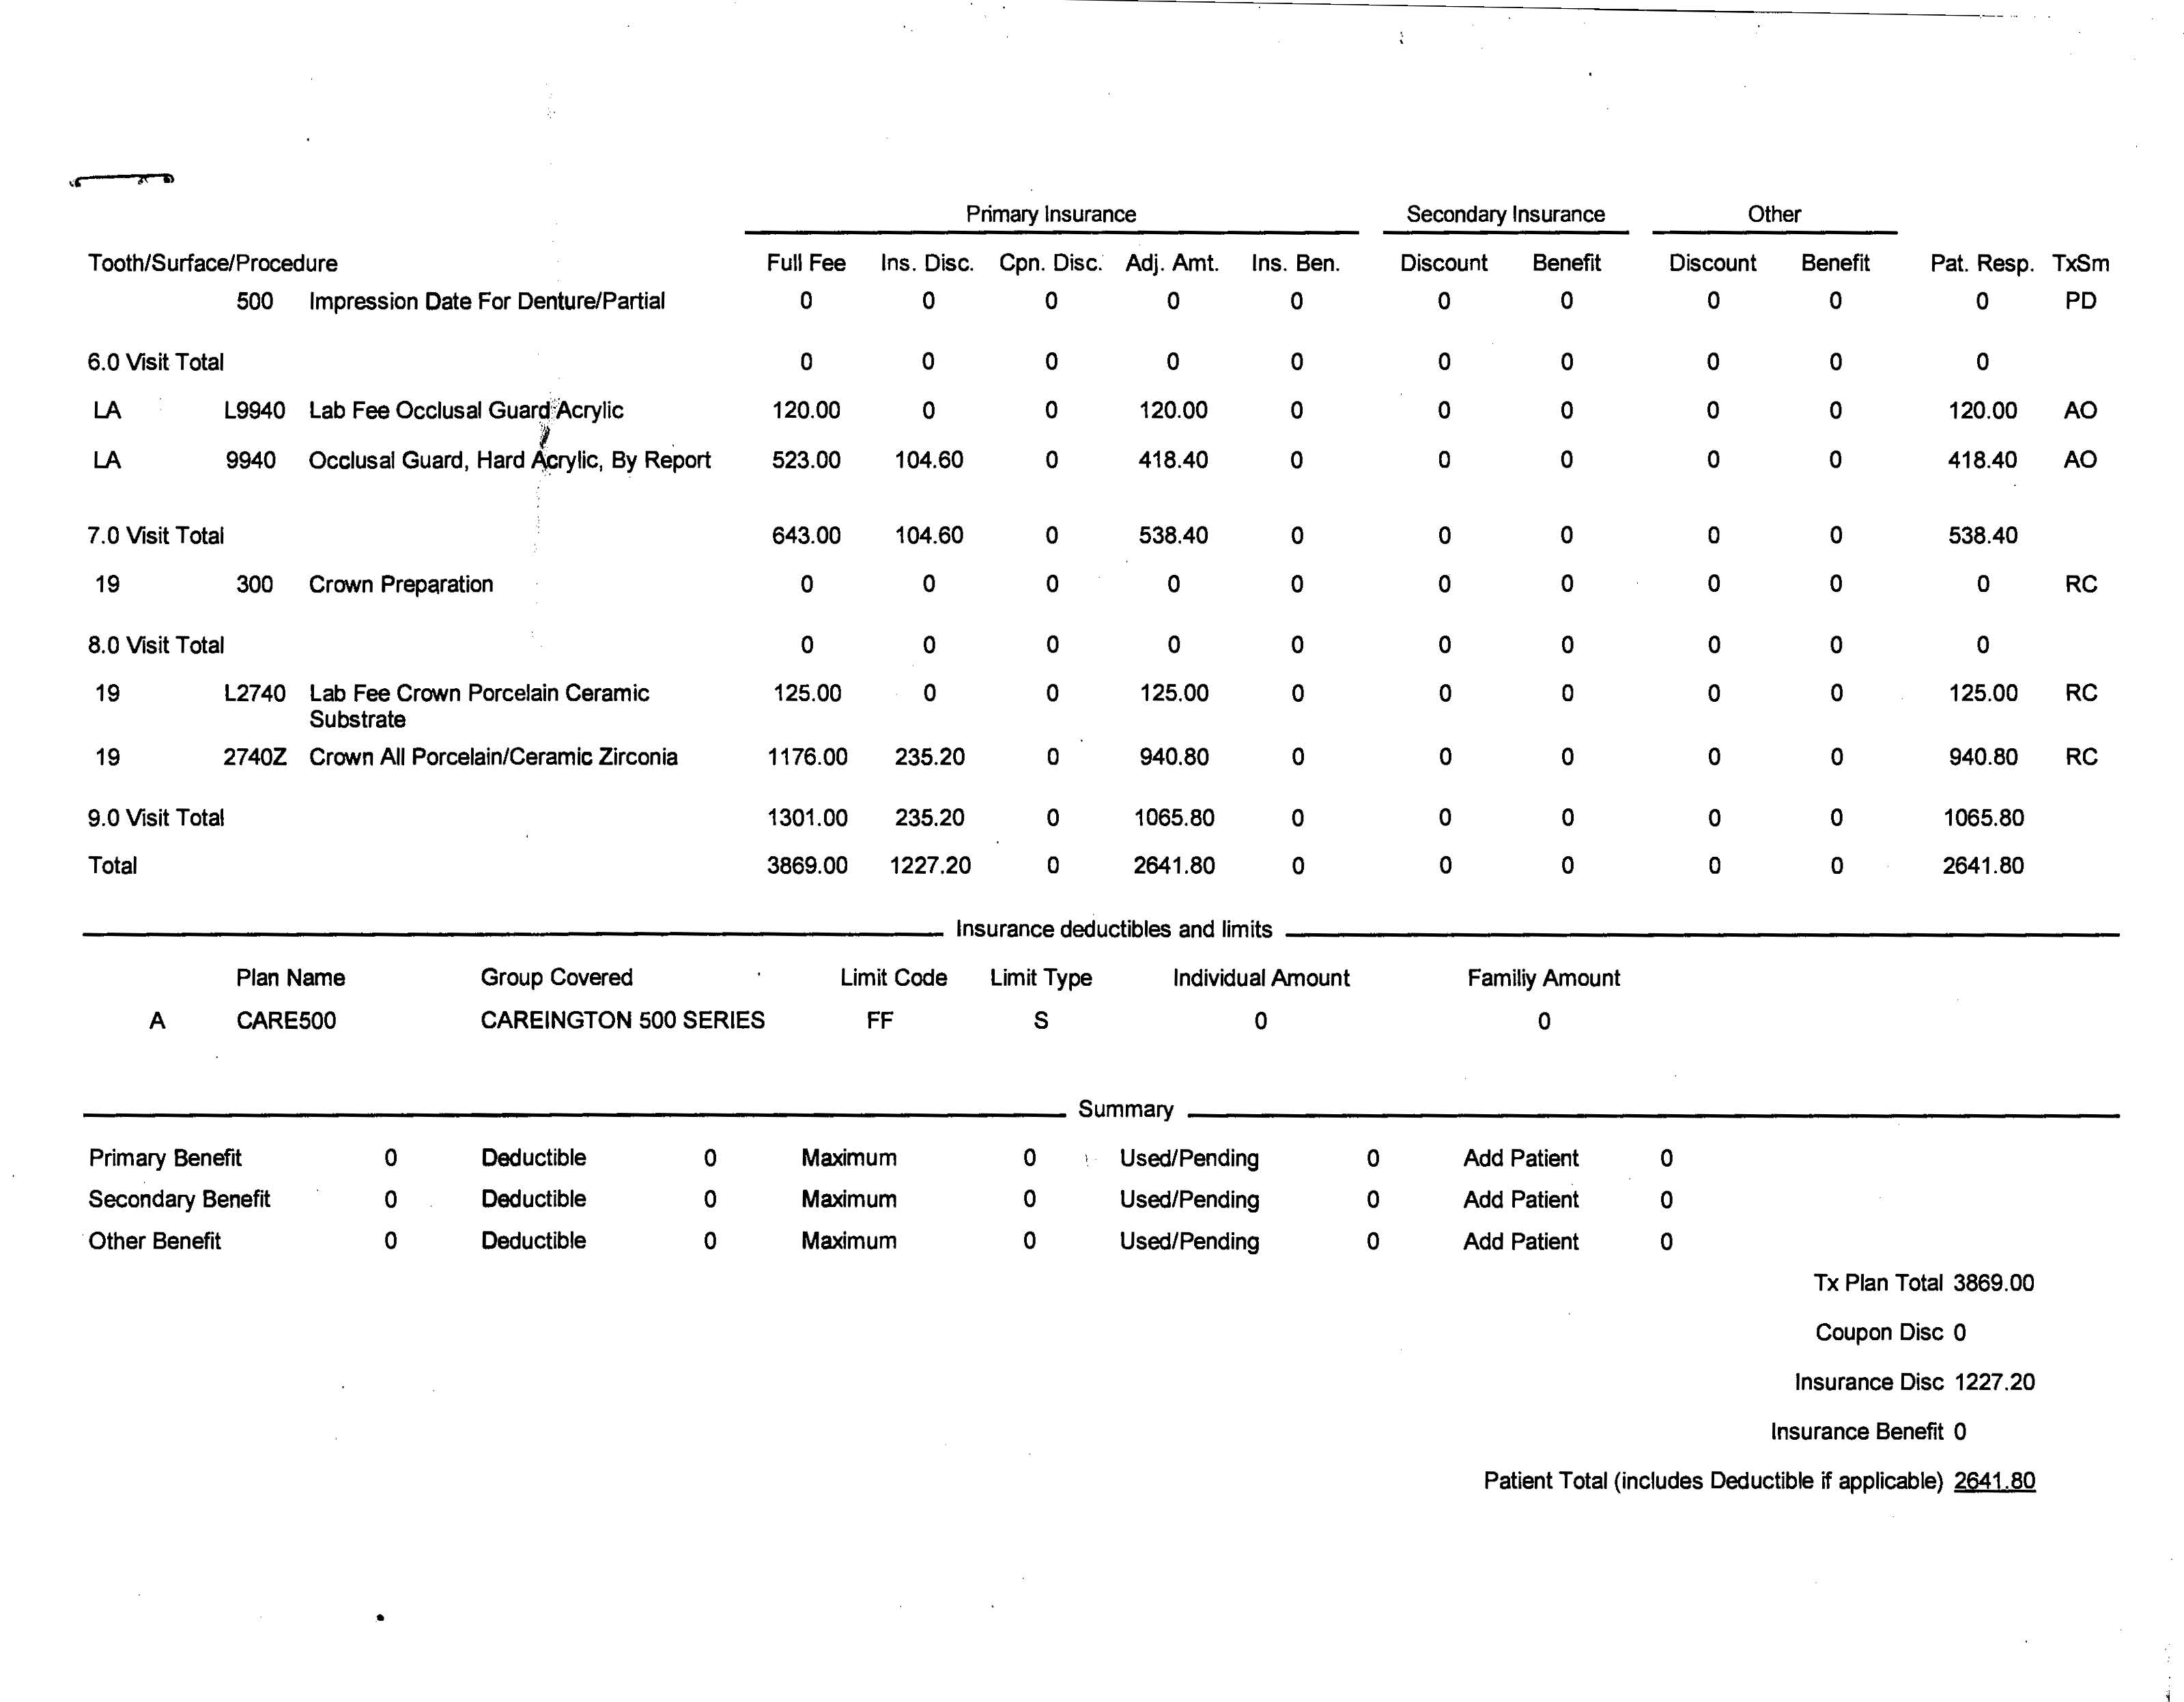 page 2 of 2-- actual proposed treatment plan from Aspen Dental showing Careington 500 "discounts"